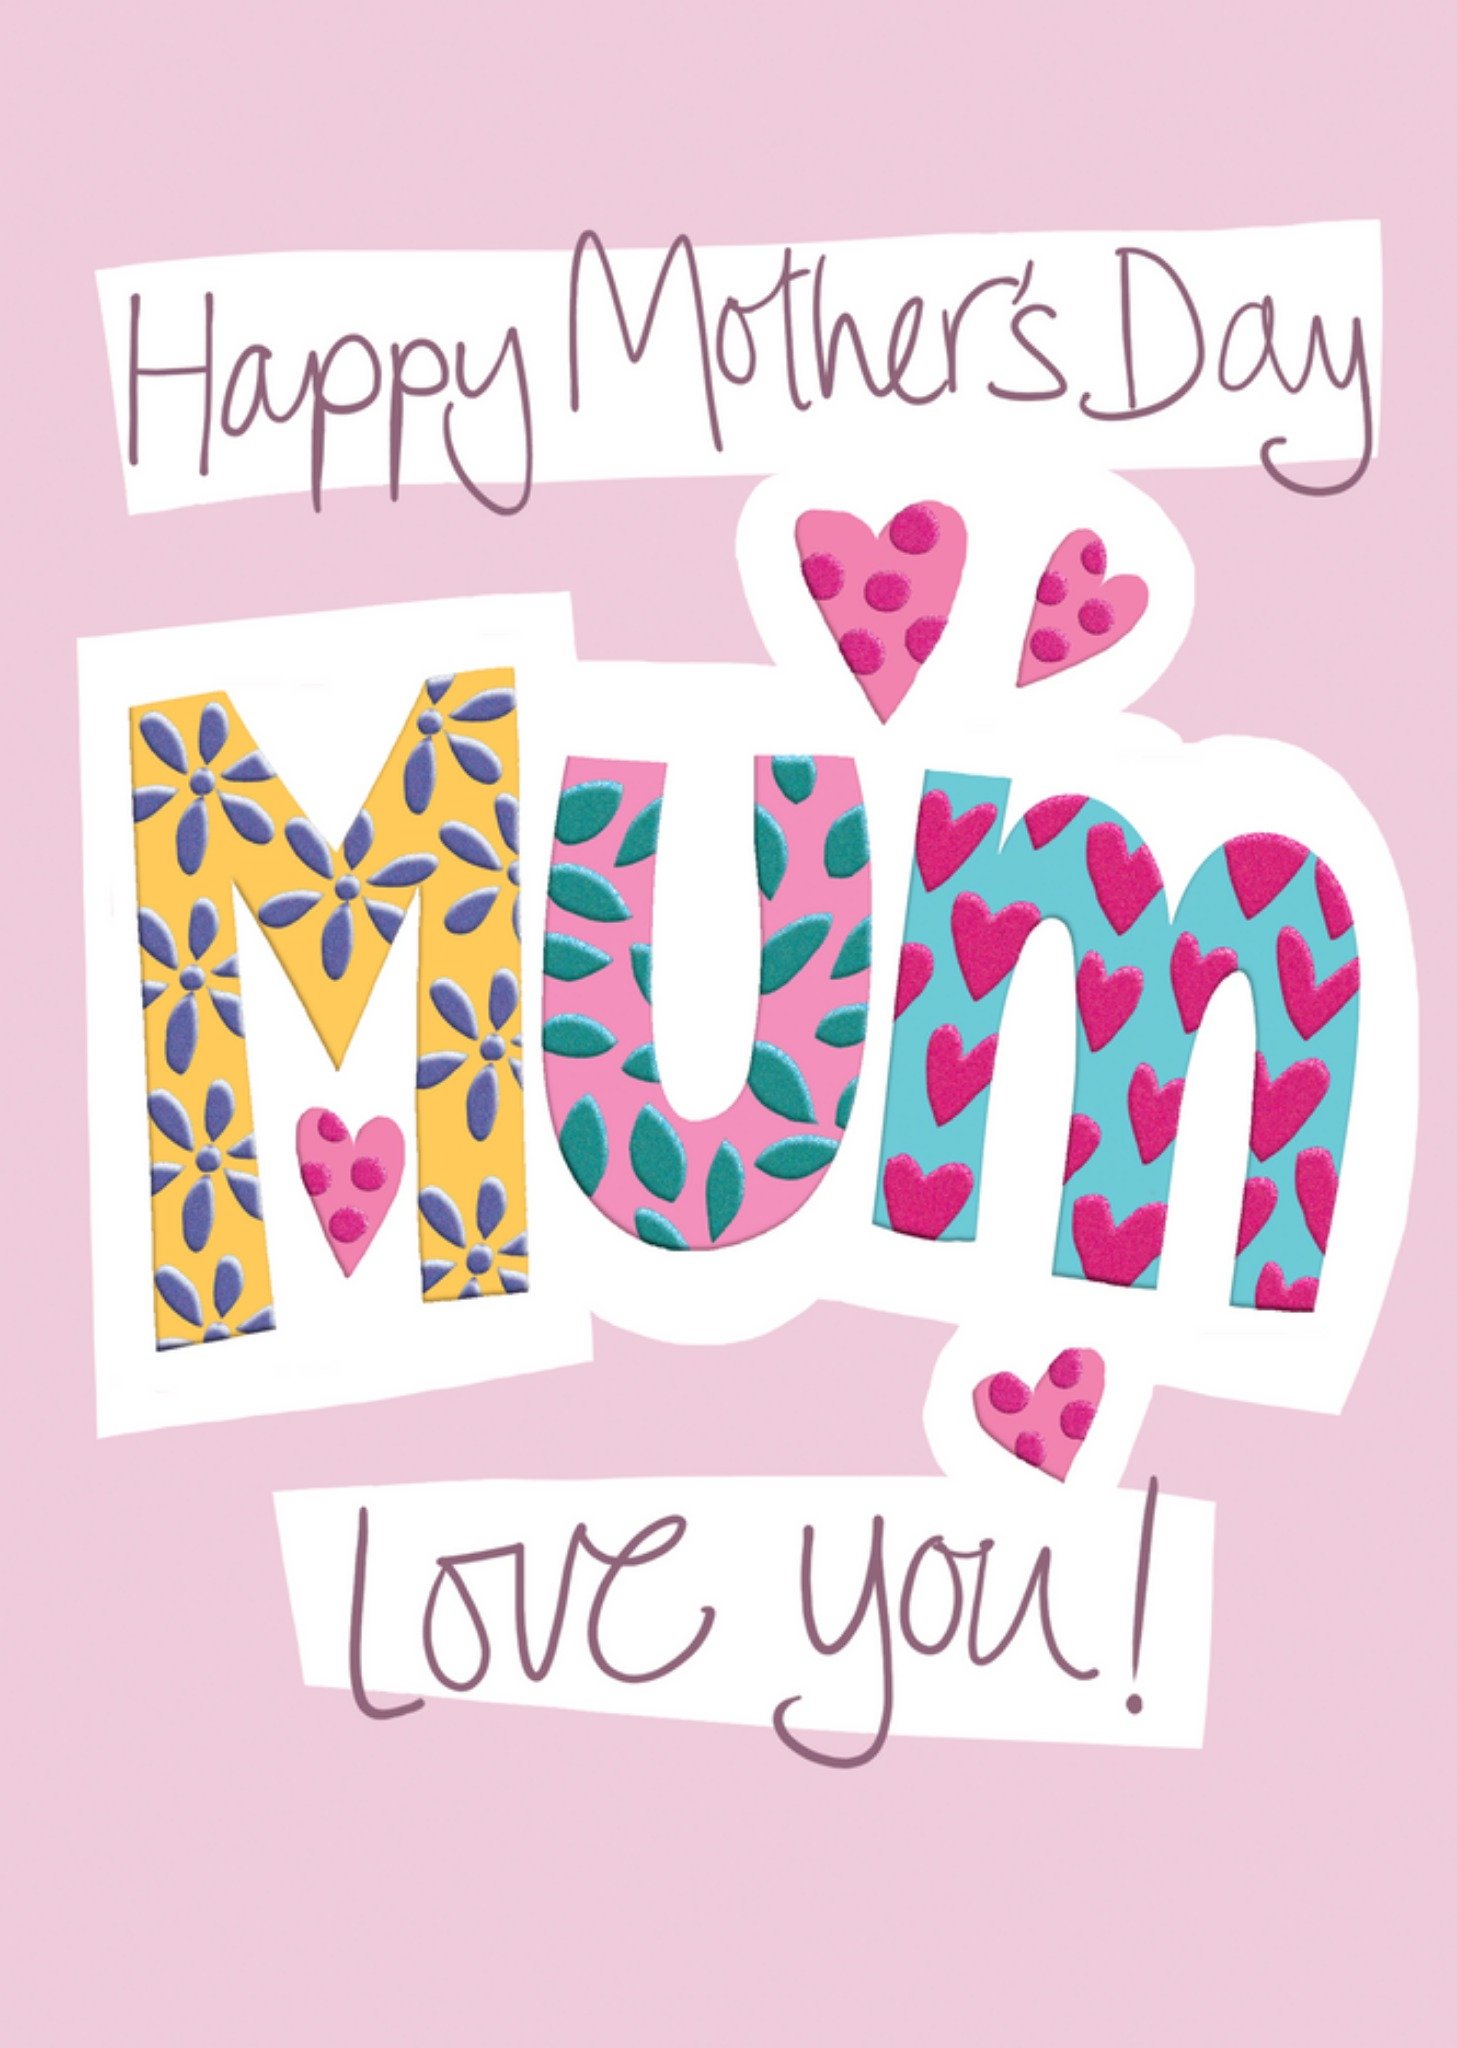 Moonpig Fun Bright Patterned Love You Mum Mother's Day Card, Large